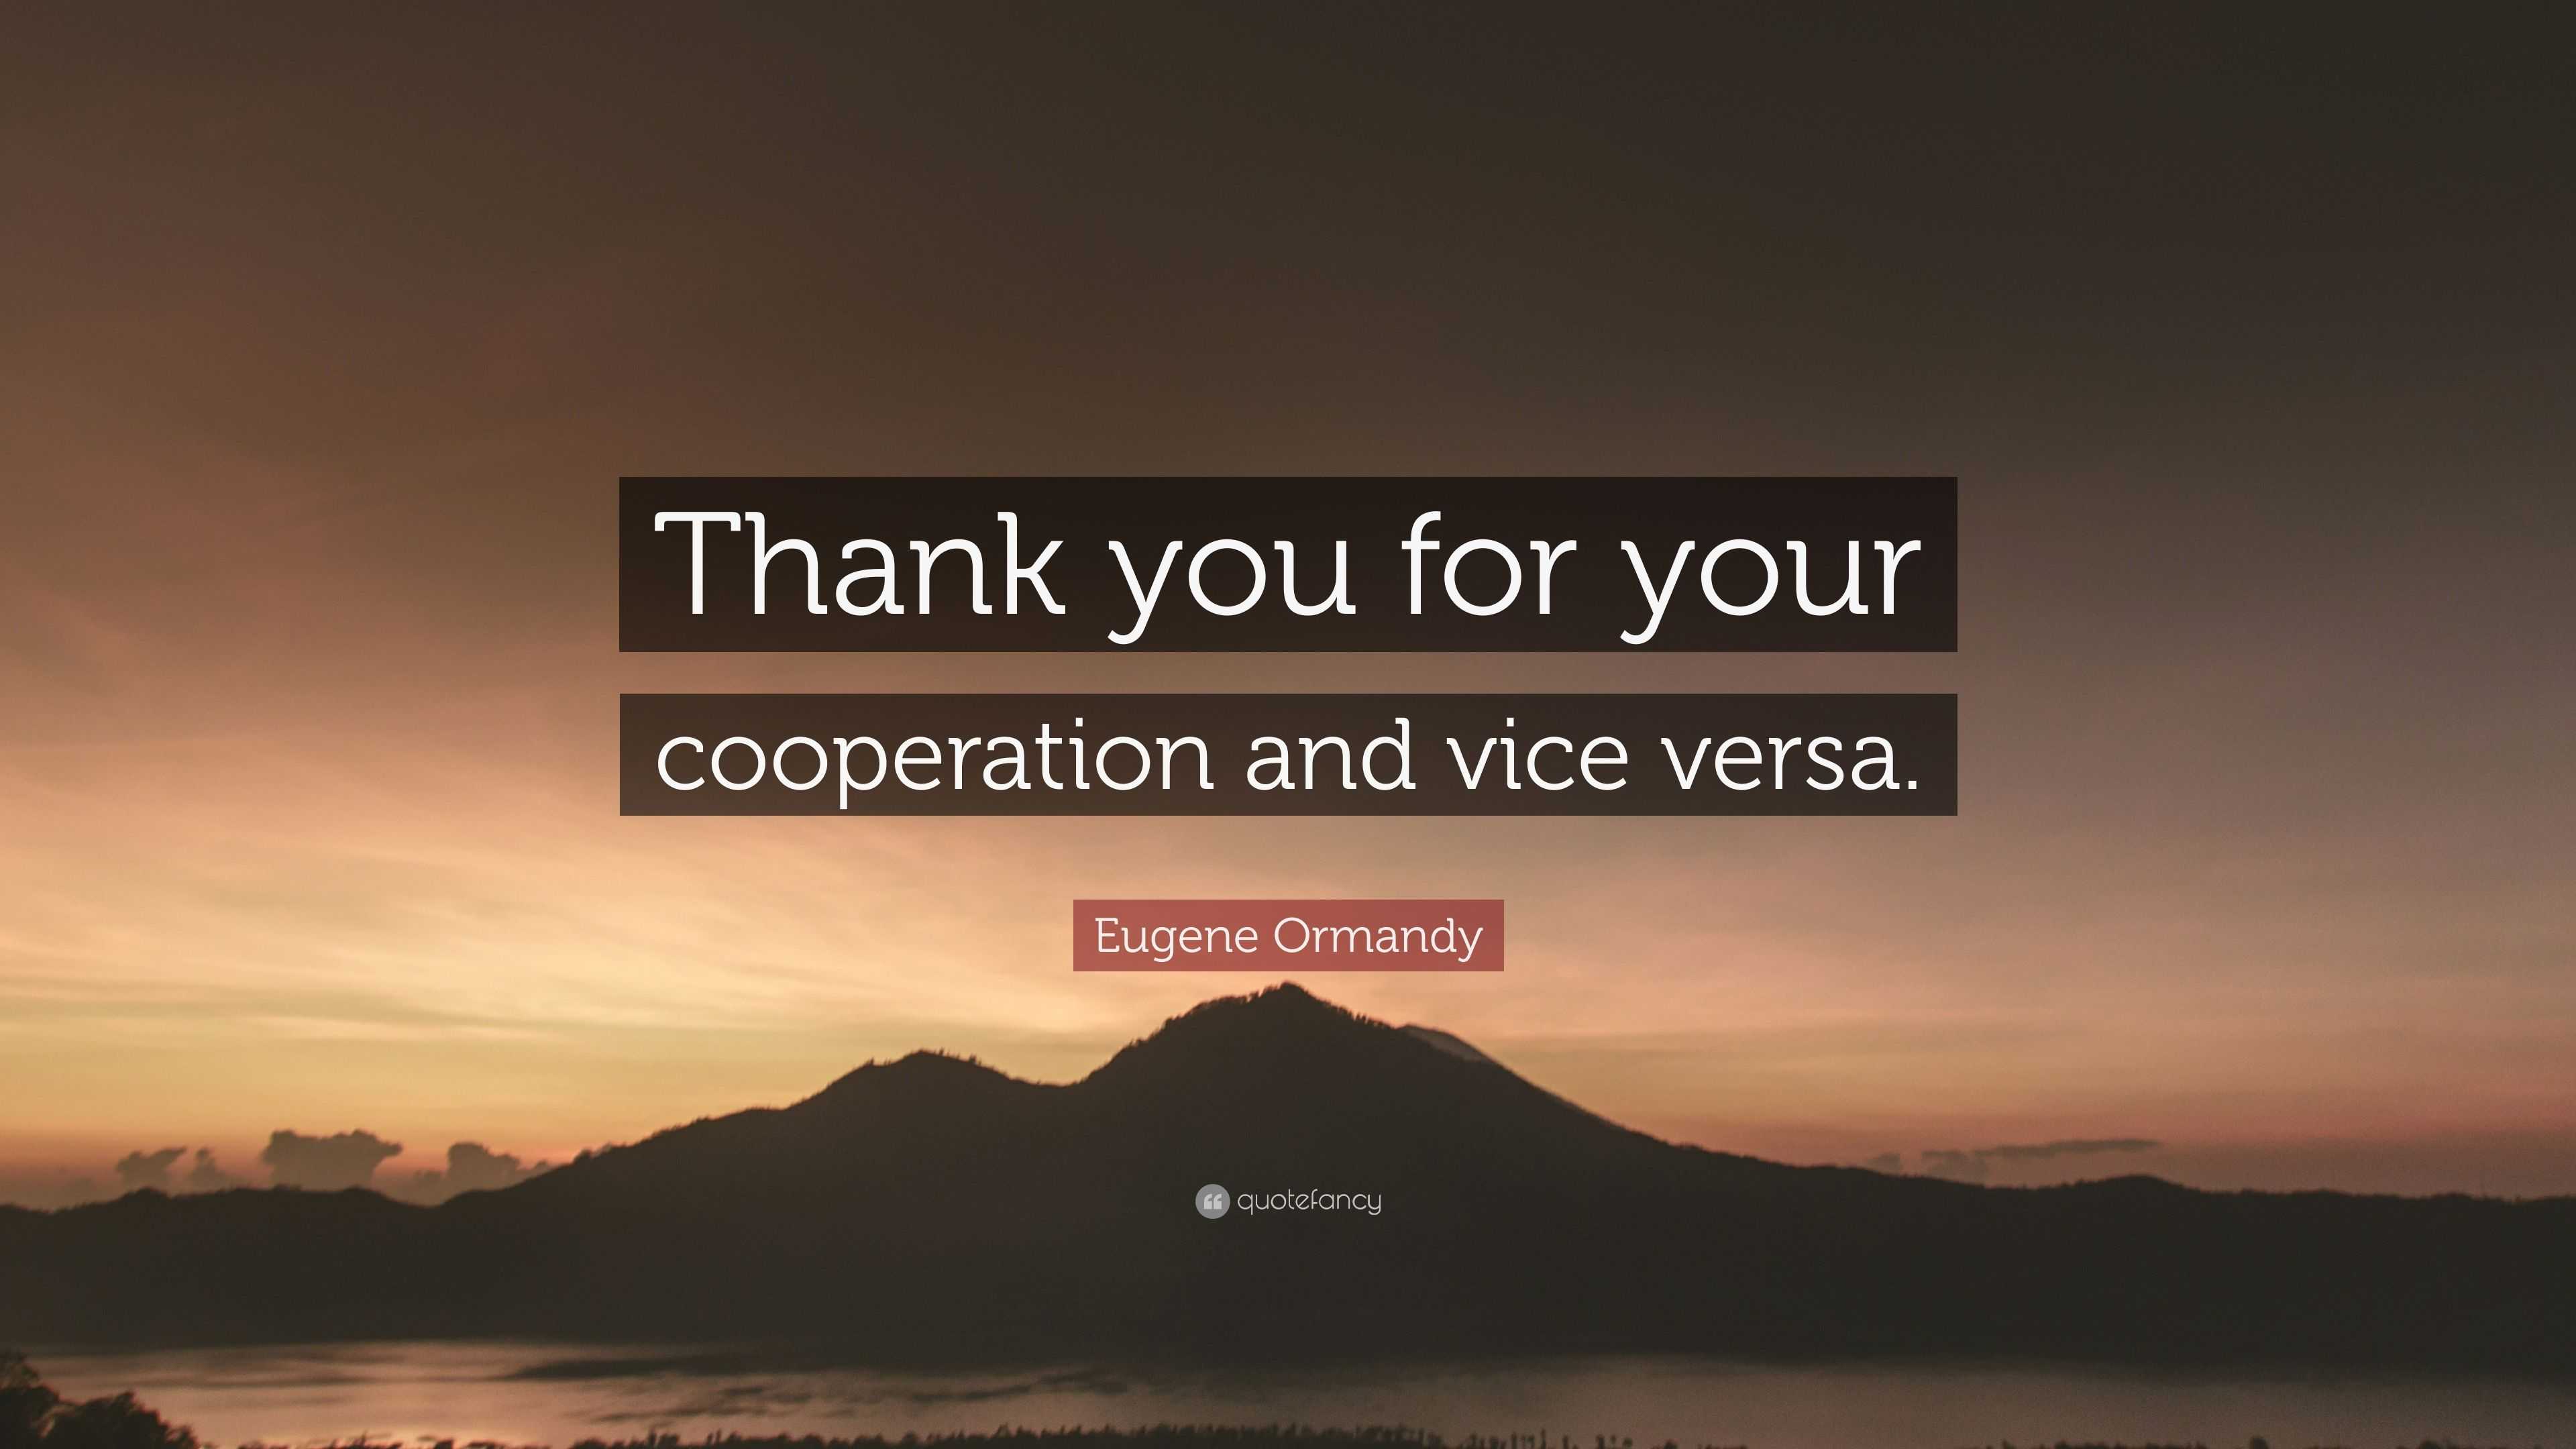 Eugene Ormandy Quote Thank You For Your Cooperation And Vice Versa 7 Wallpapers Quotefancy